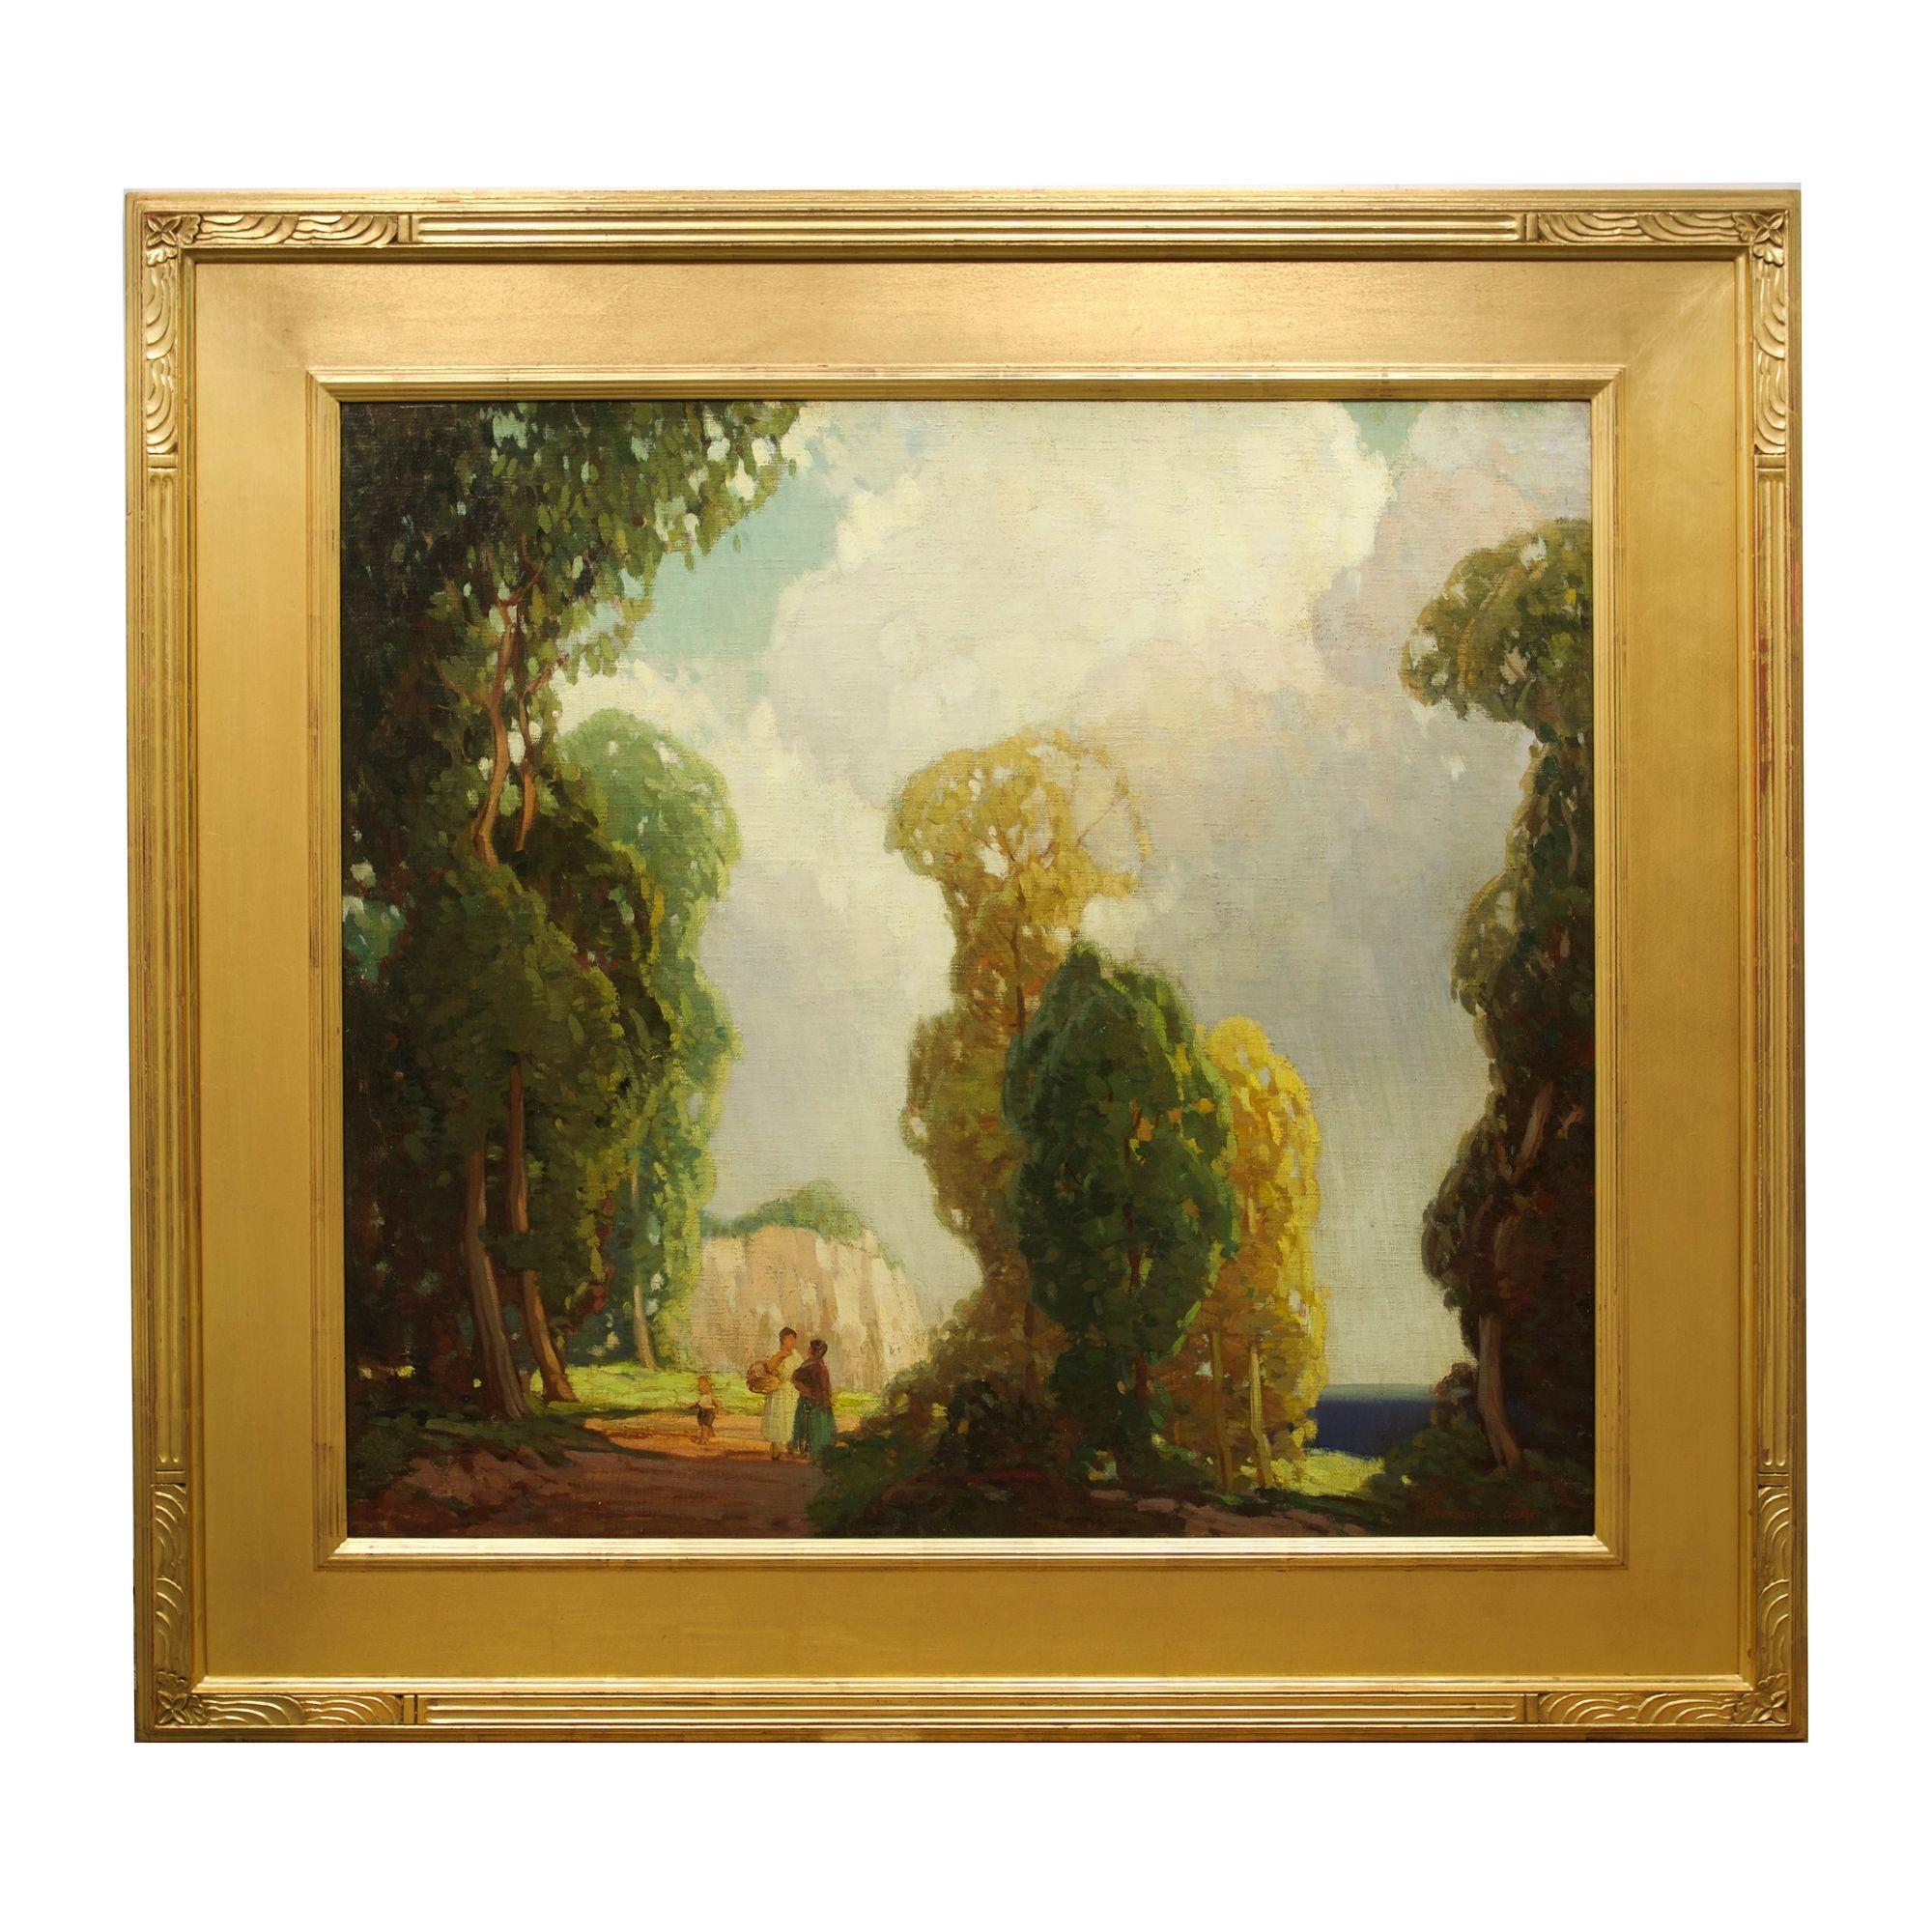 American Colorist Landscape Painting “Lake Shore” by Frederic M. Grant In Good Condition For Sale In Shippensburg, PA